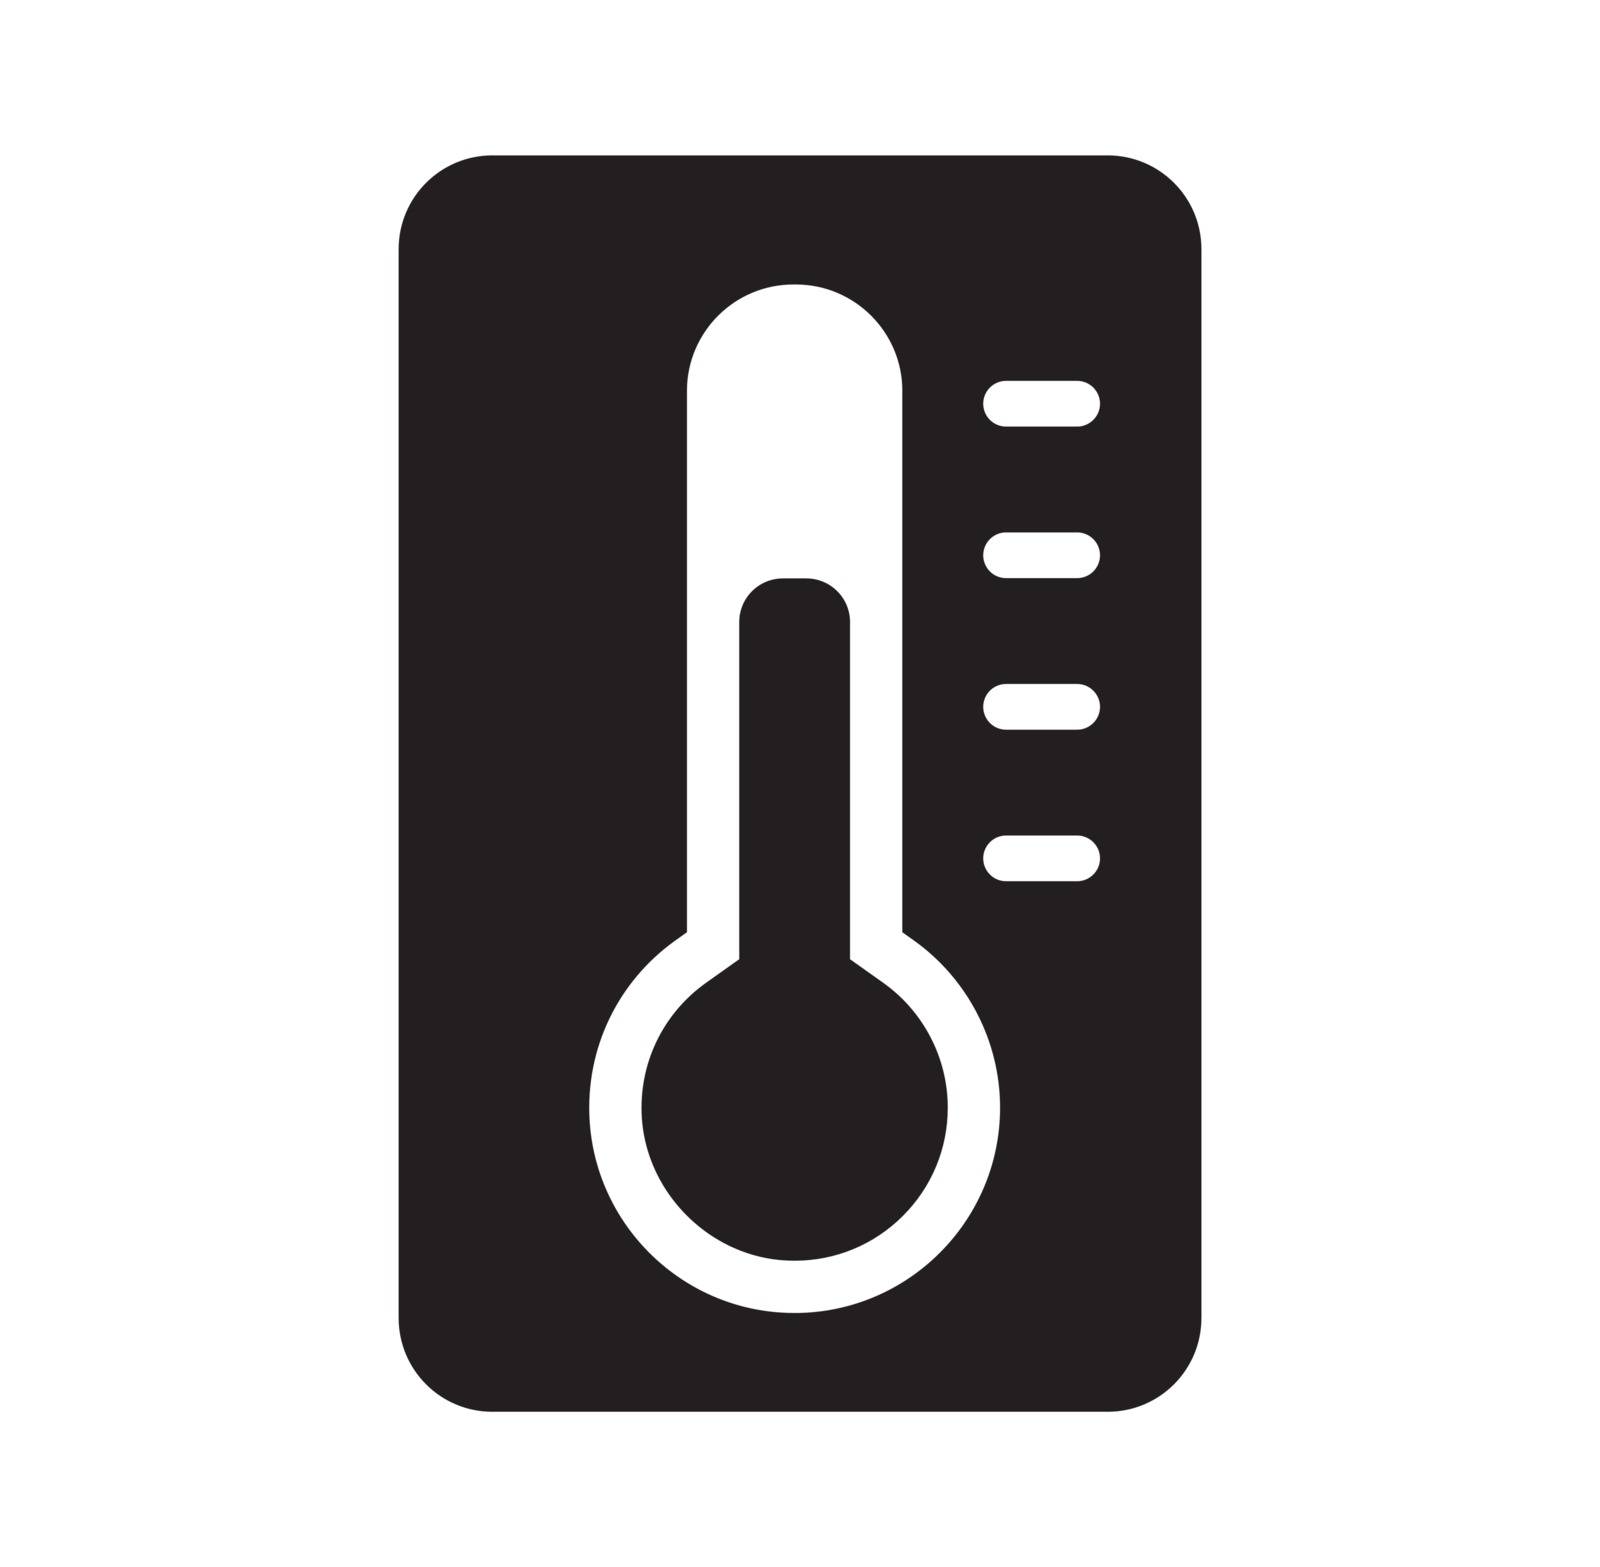 Thermometer / barometer icon by barks